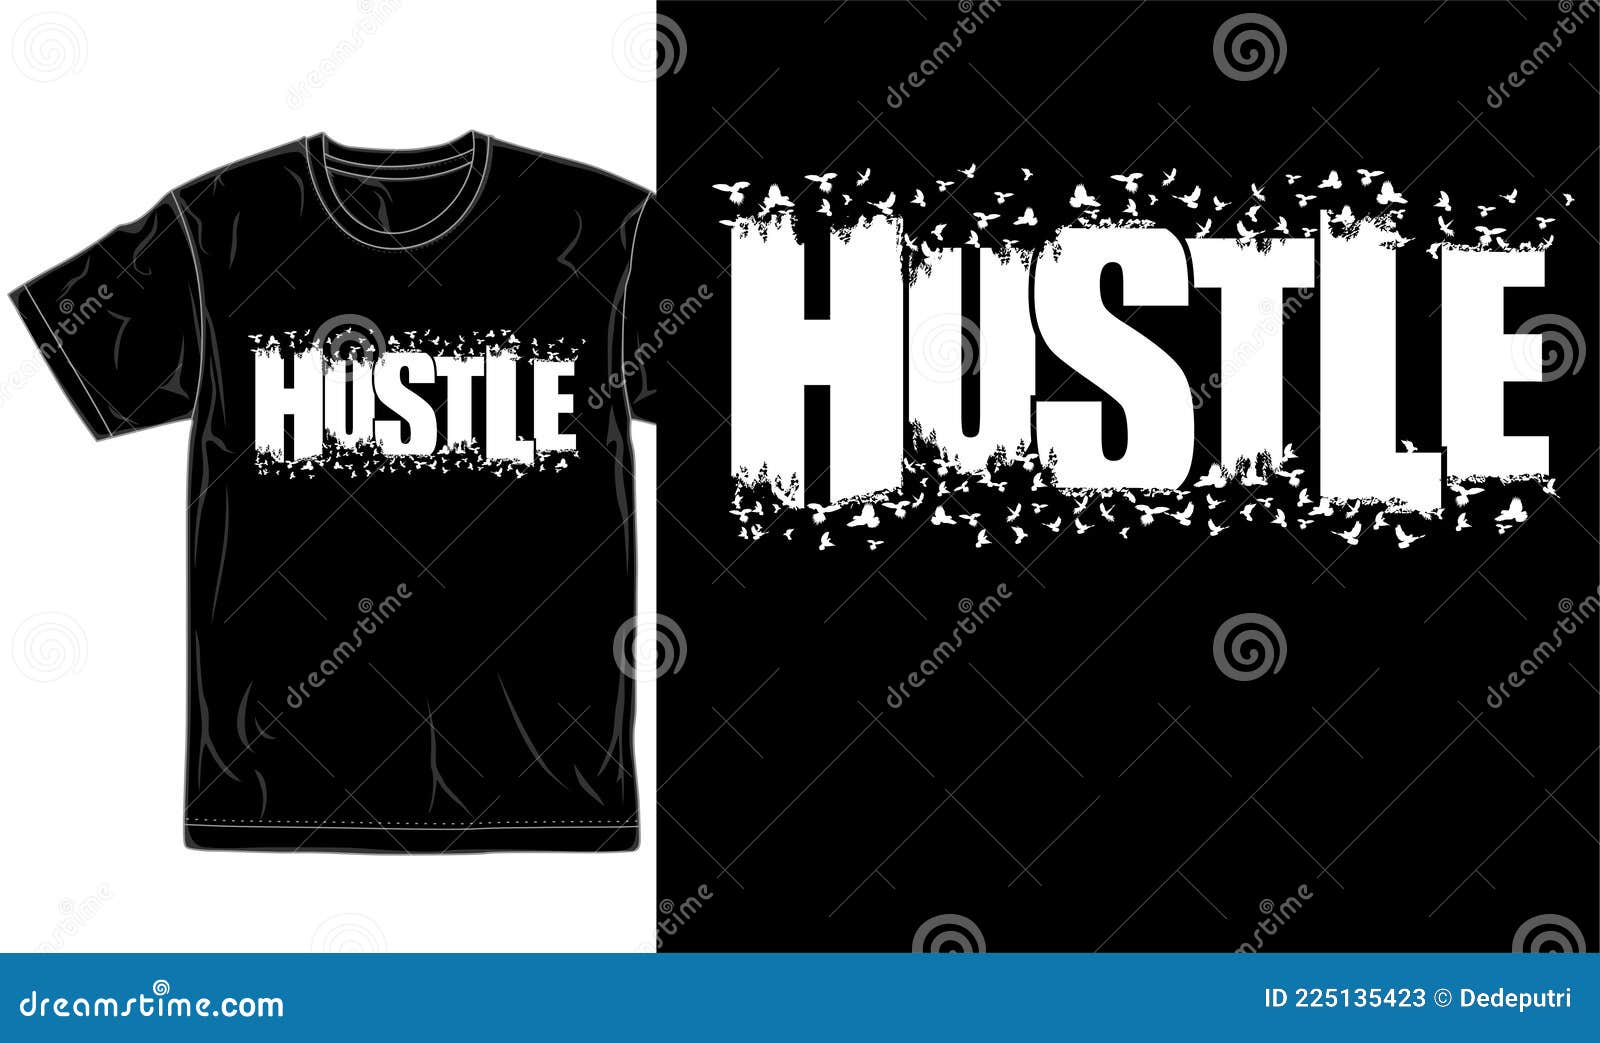 Hustle Motivational Quotes T Shirt Design Graphic Vector Stock Vector ...